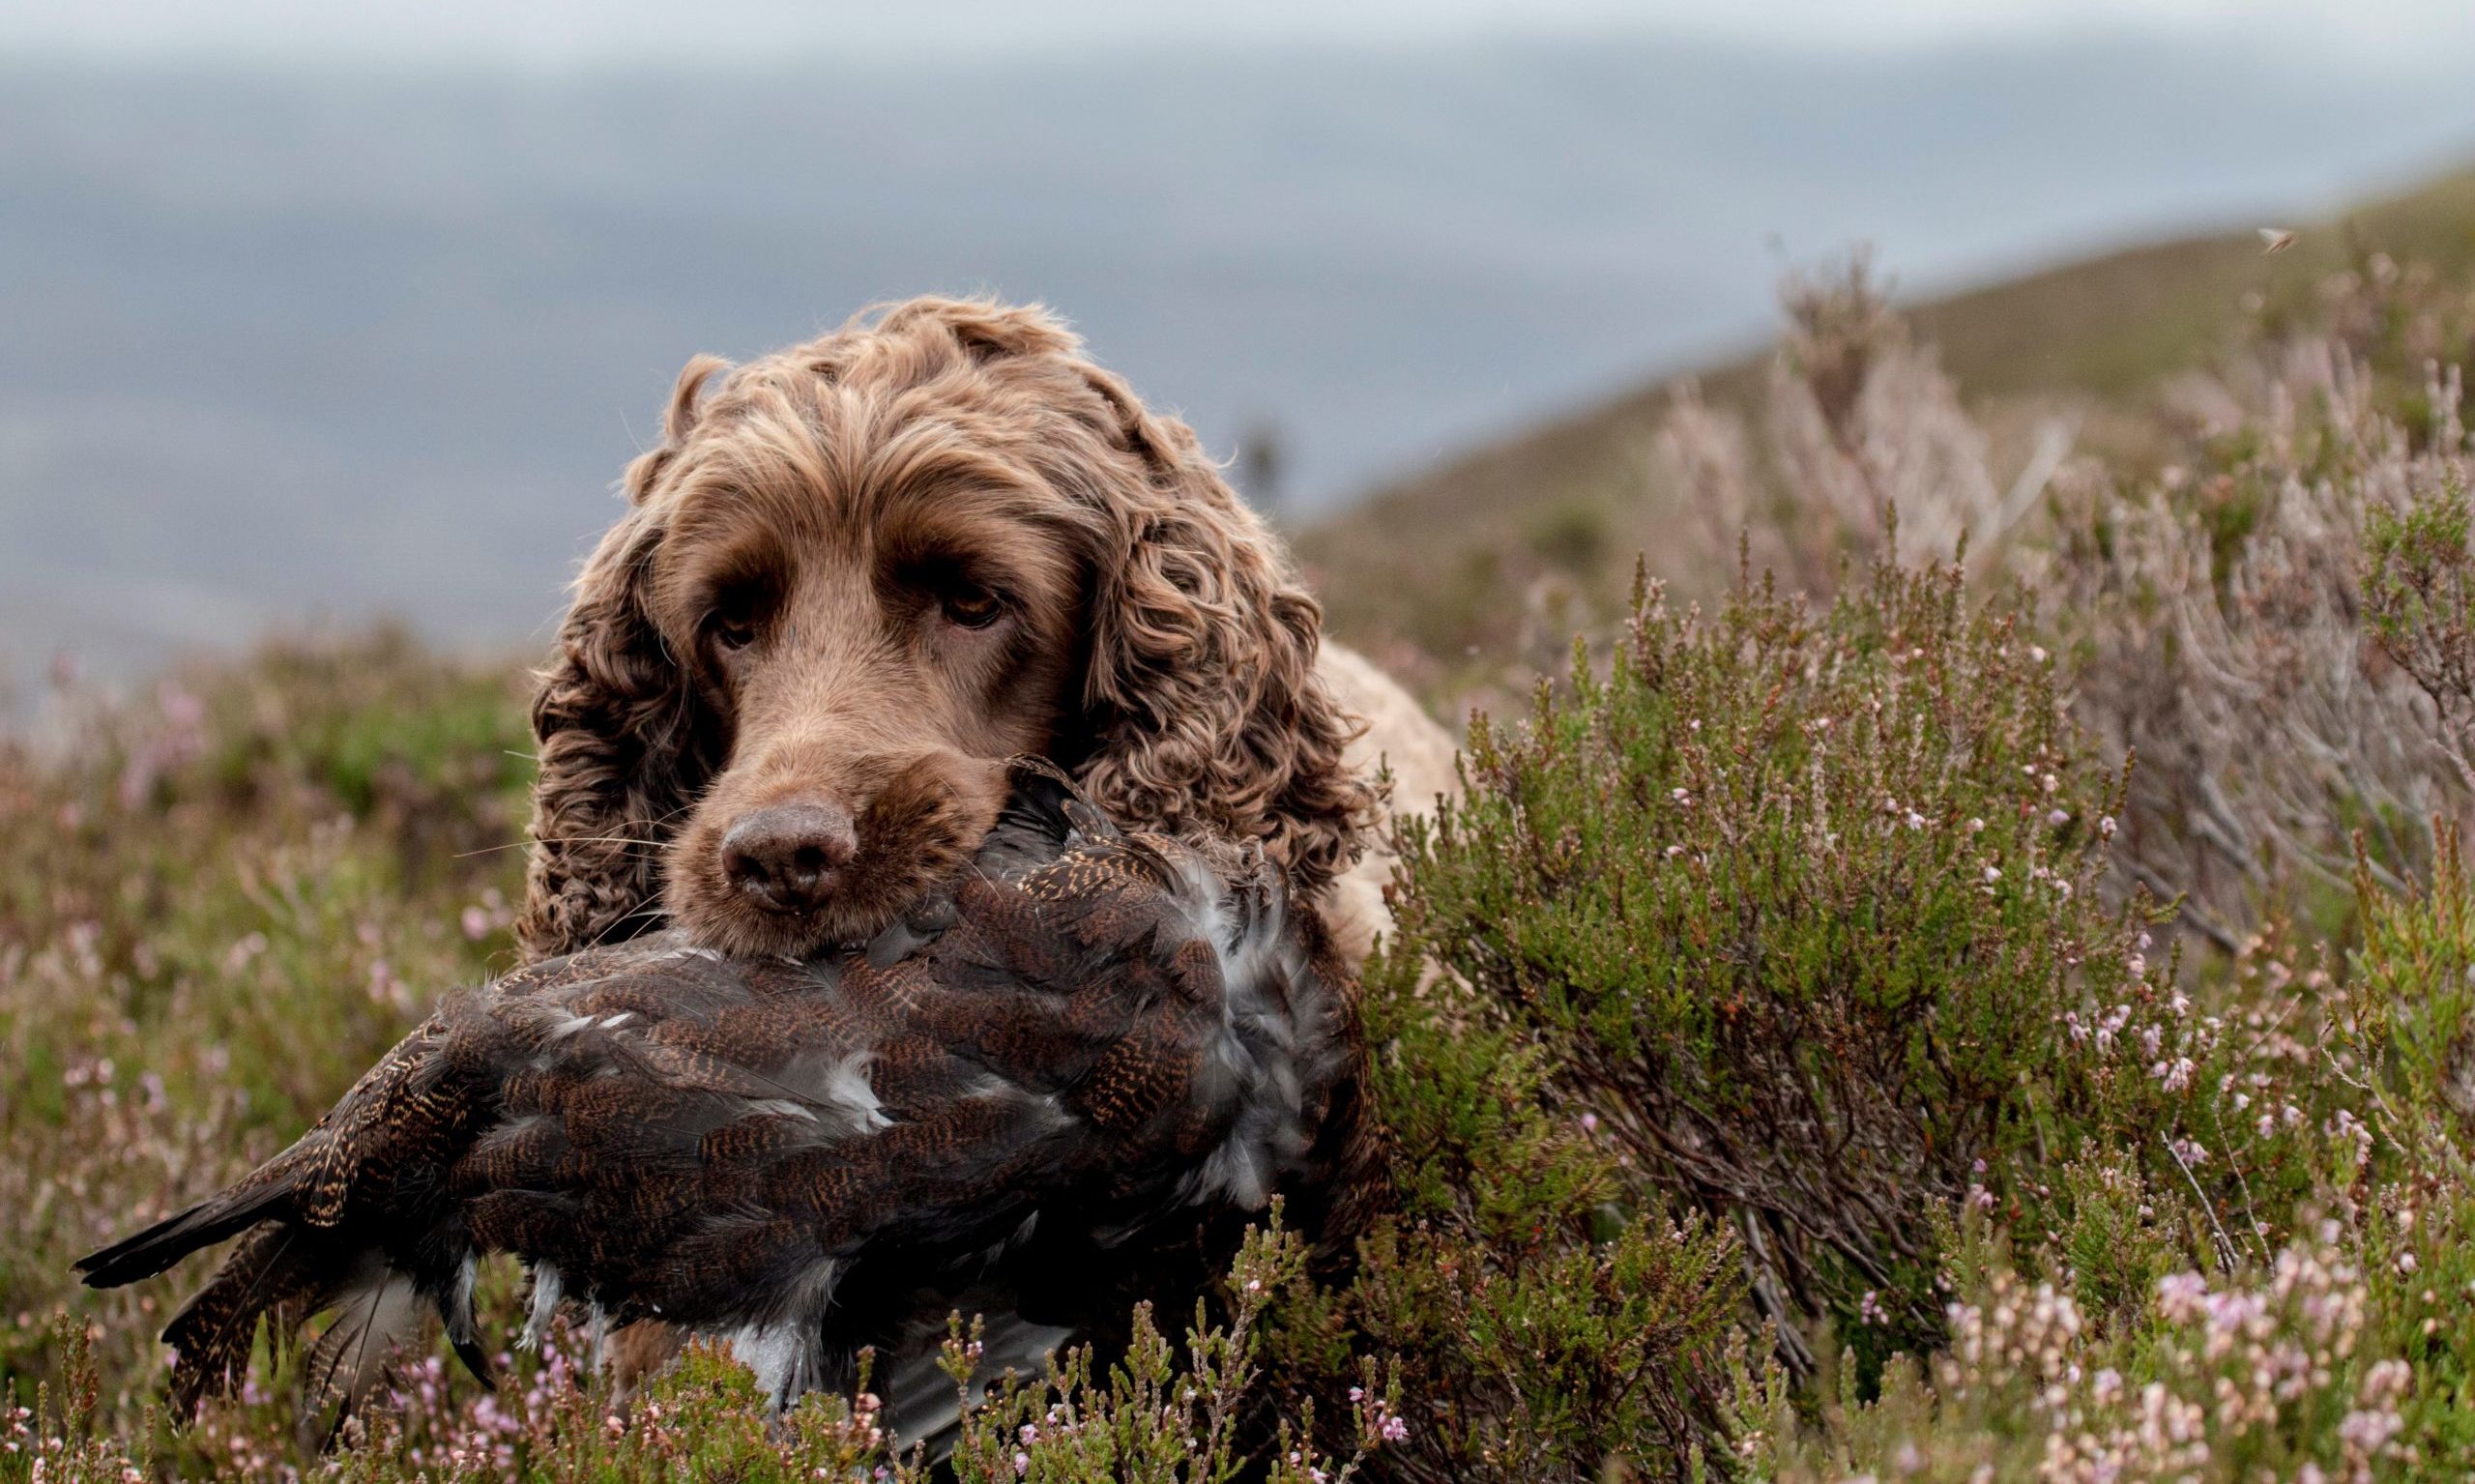 A working dog retrieving a red grouse for the food chain. Grouse shoots could be the key to economic recovery in some remote communities.